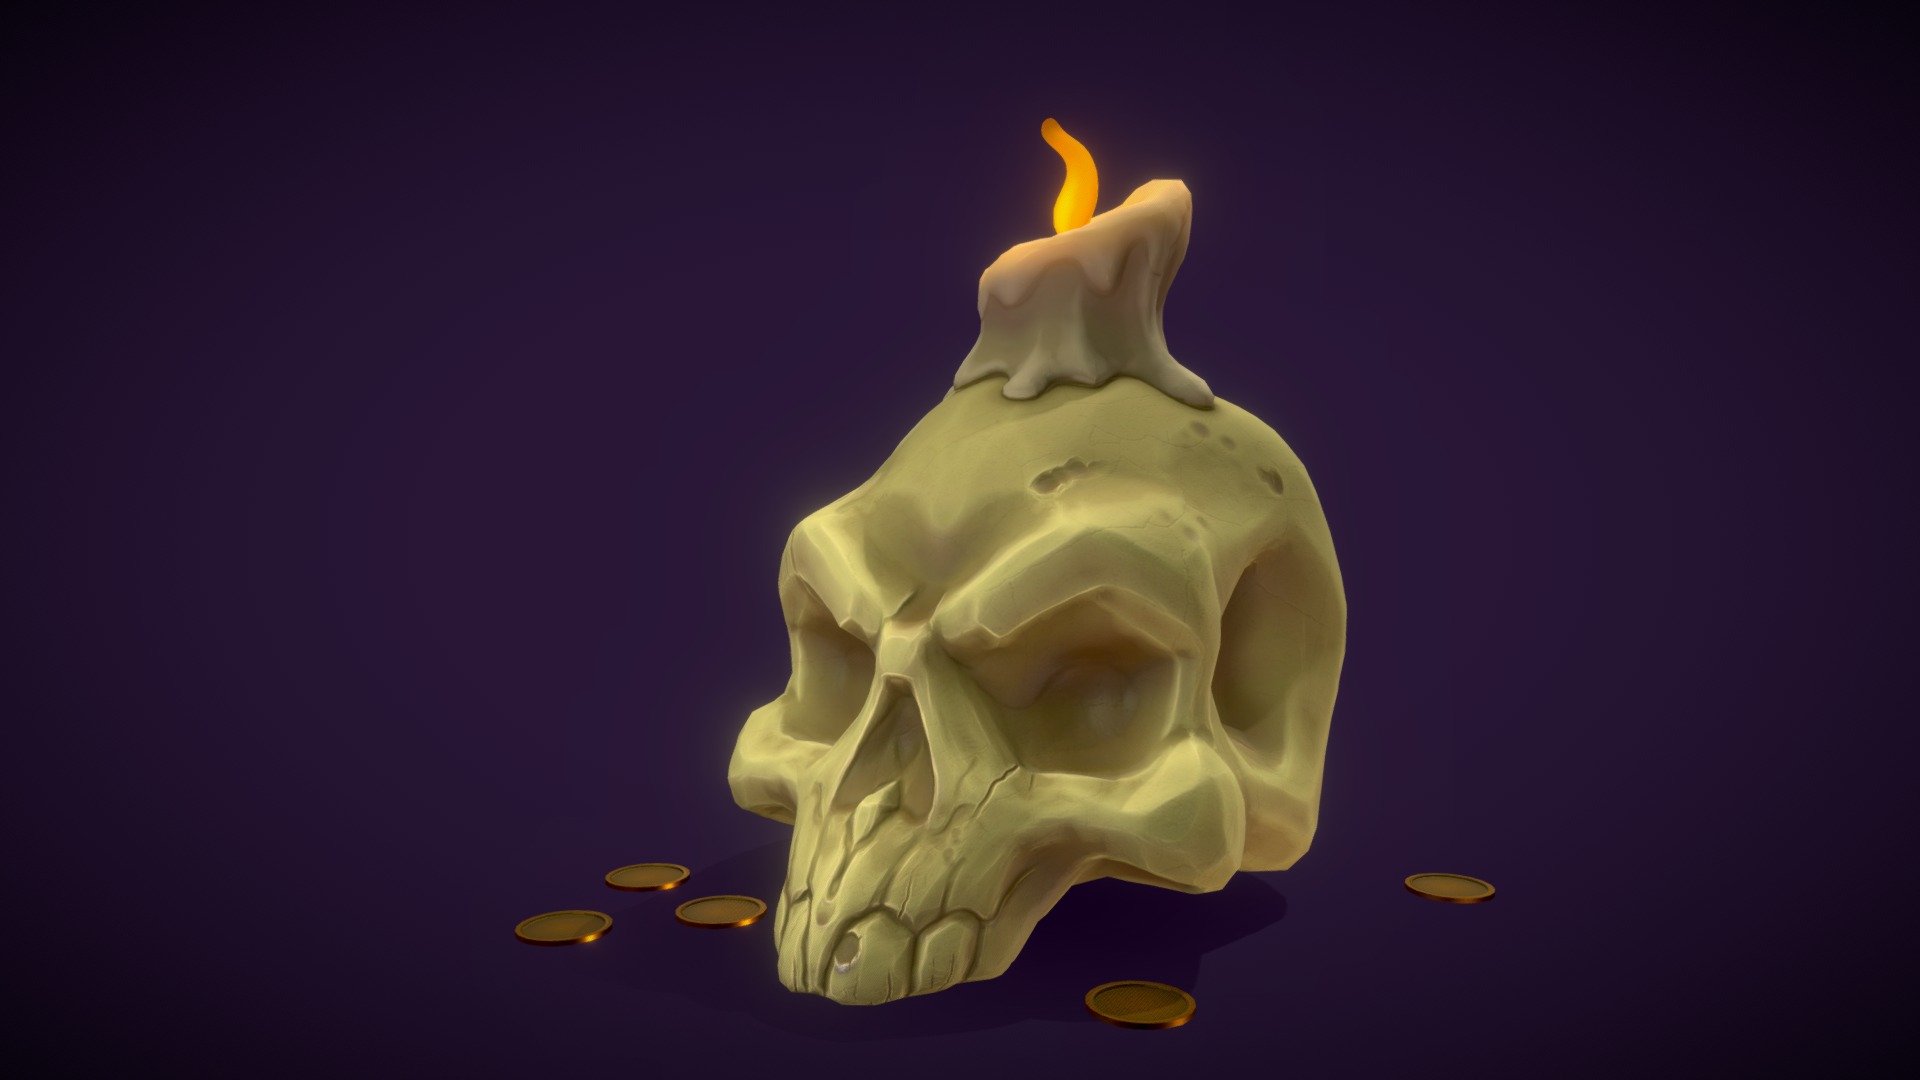 Here's is a skull I made in Zbrush and textured in Substance Painter for halloween! - Halloween Skull Candle - 3D model by nor.raheem 3d model